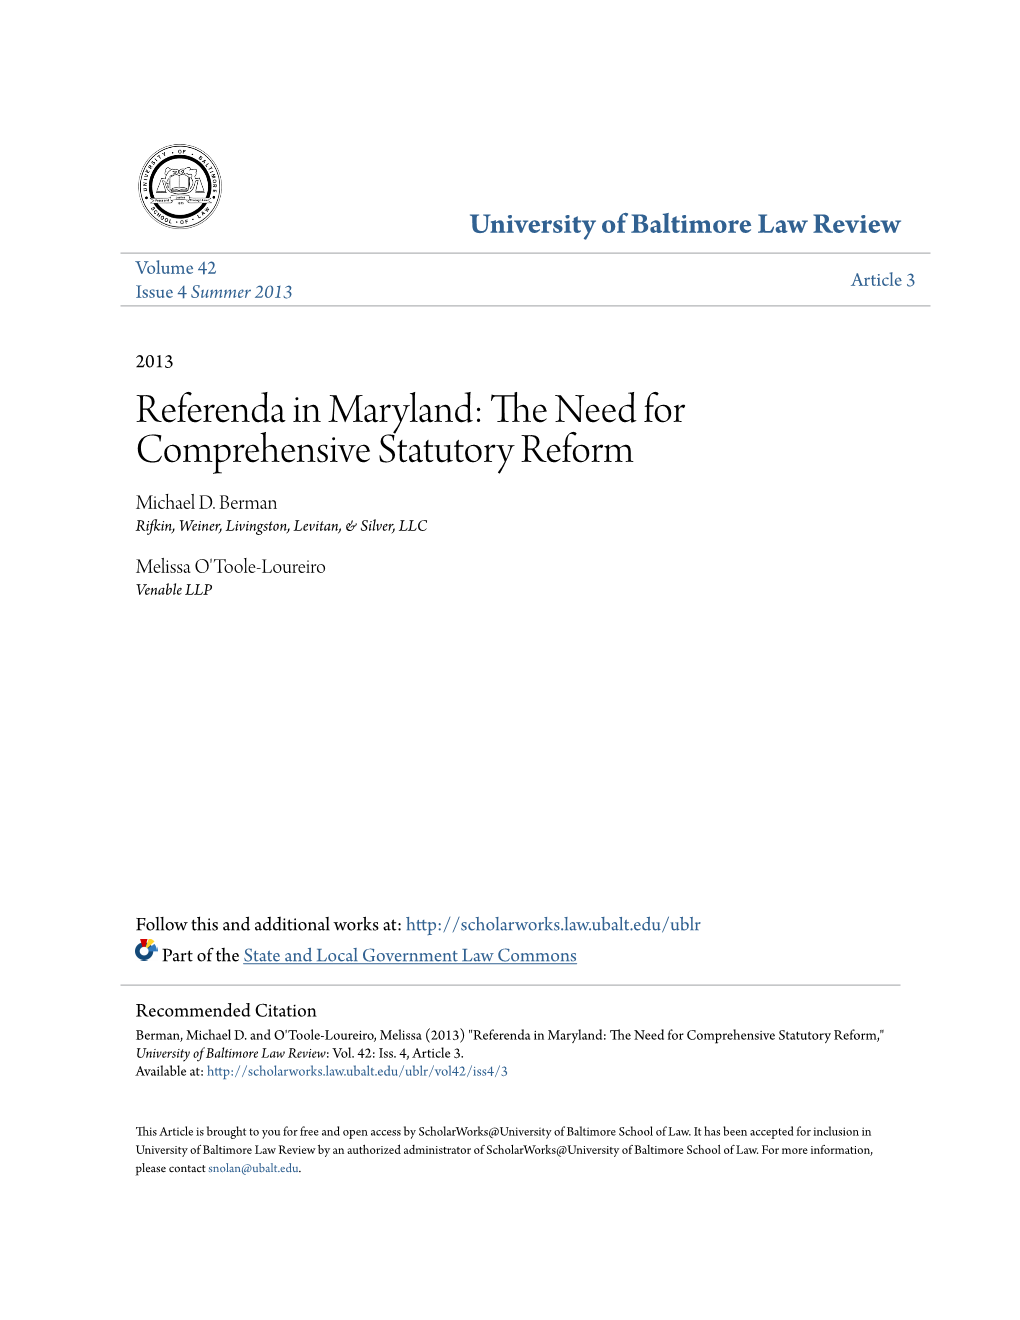 Referenda in Maryland: the Eedn for Comprehensive Statutory Reform Michael D